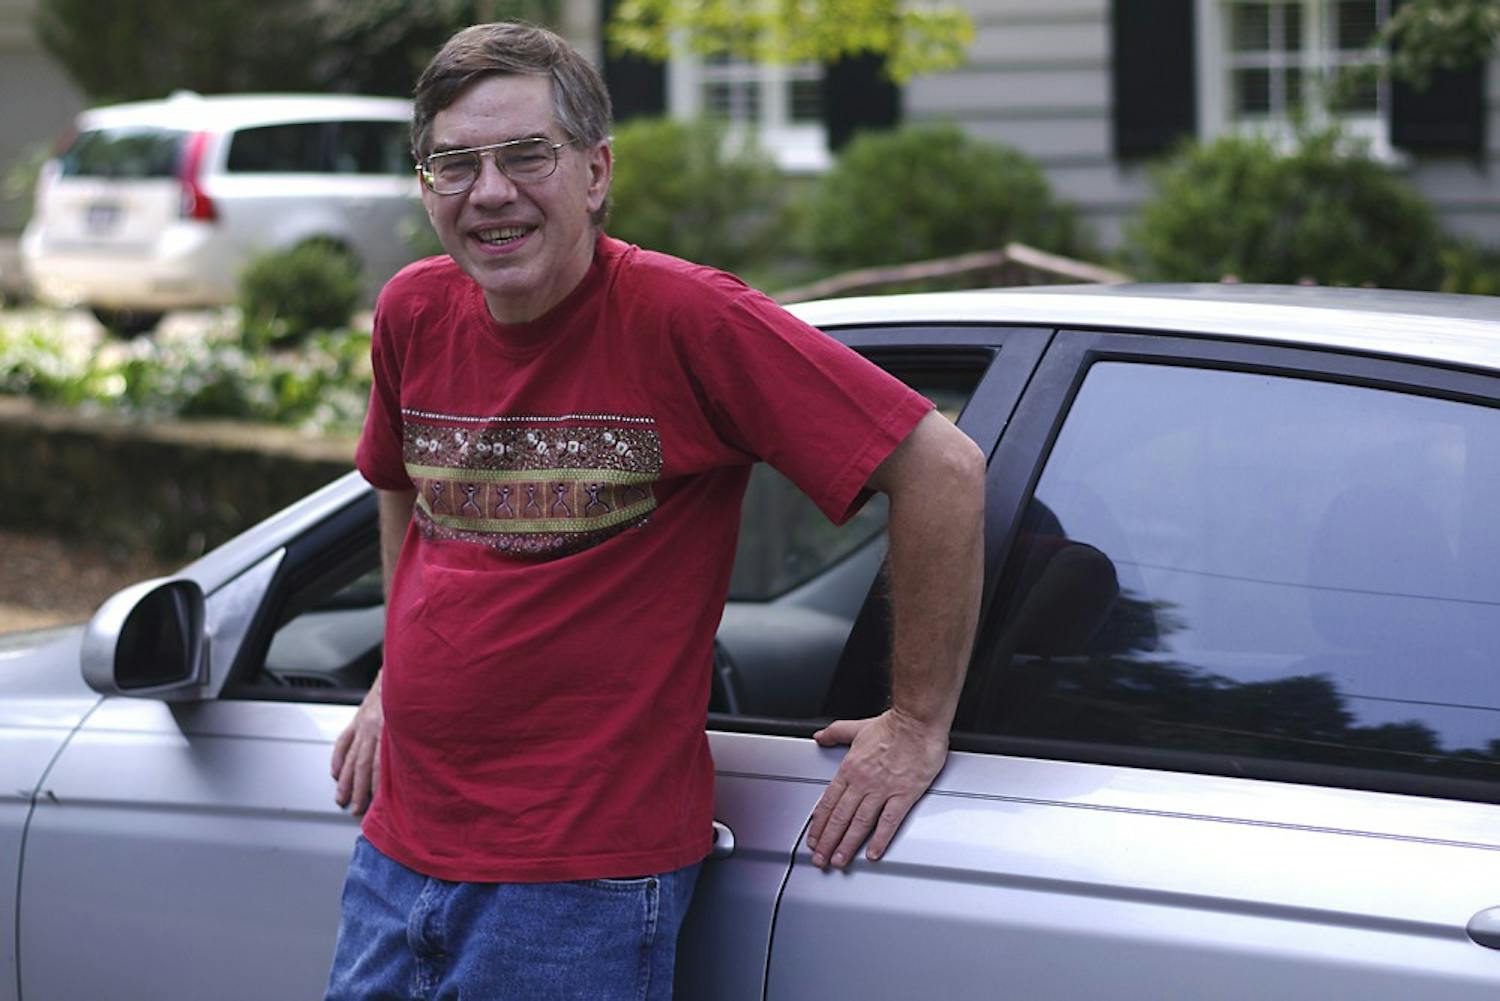 Libertarian candidate and pizza delivery man, Sean Haugh, stands in front of his car on August 16th, 2014.